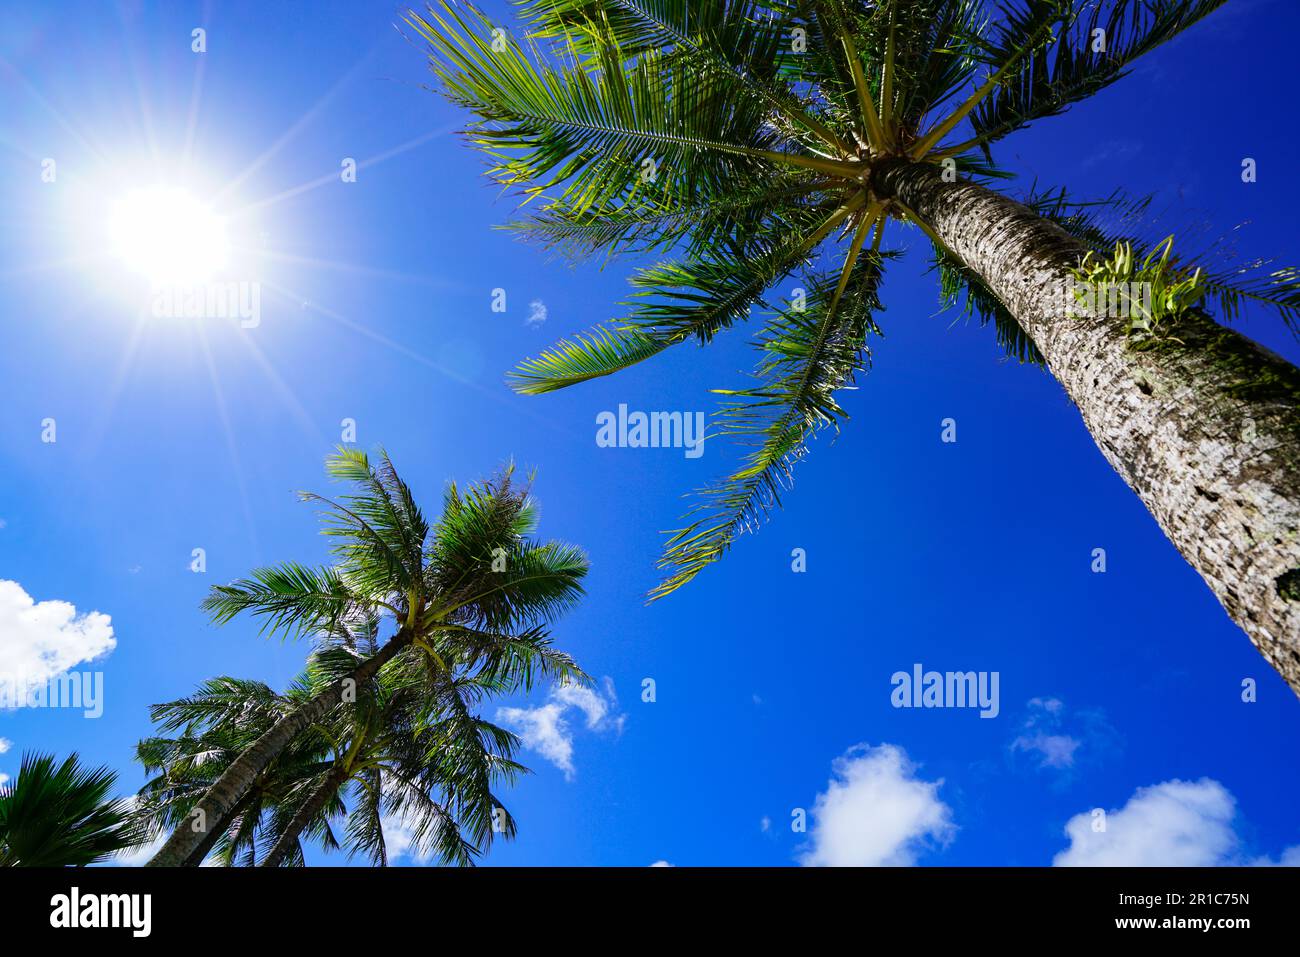 Palm trees and blue sky in Guam Stock Photo